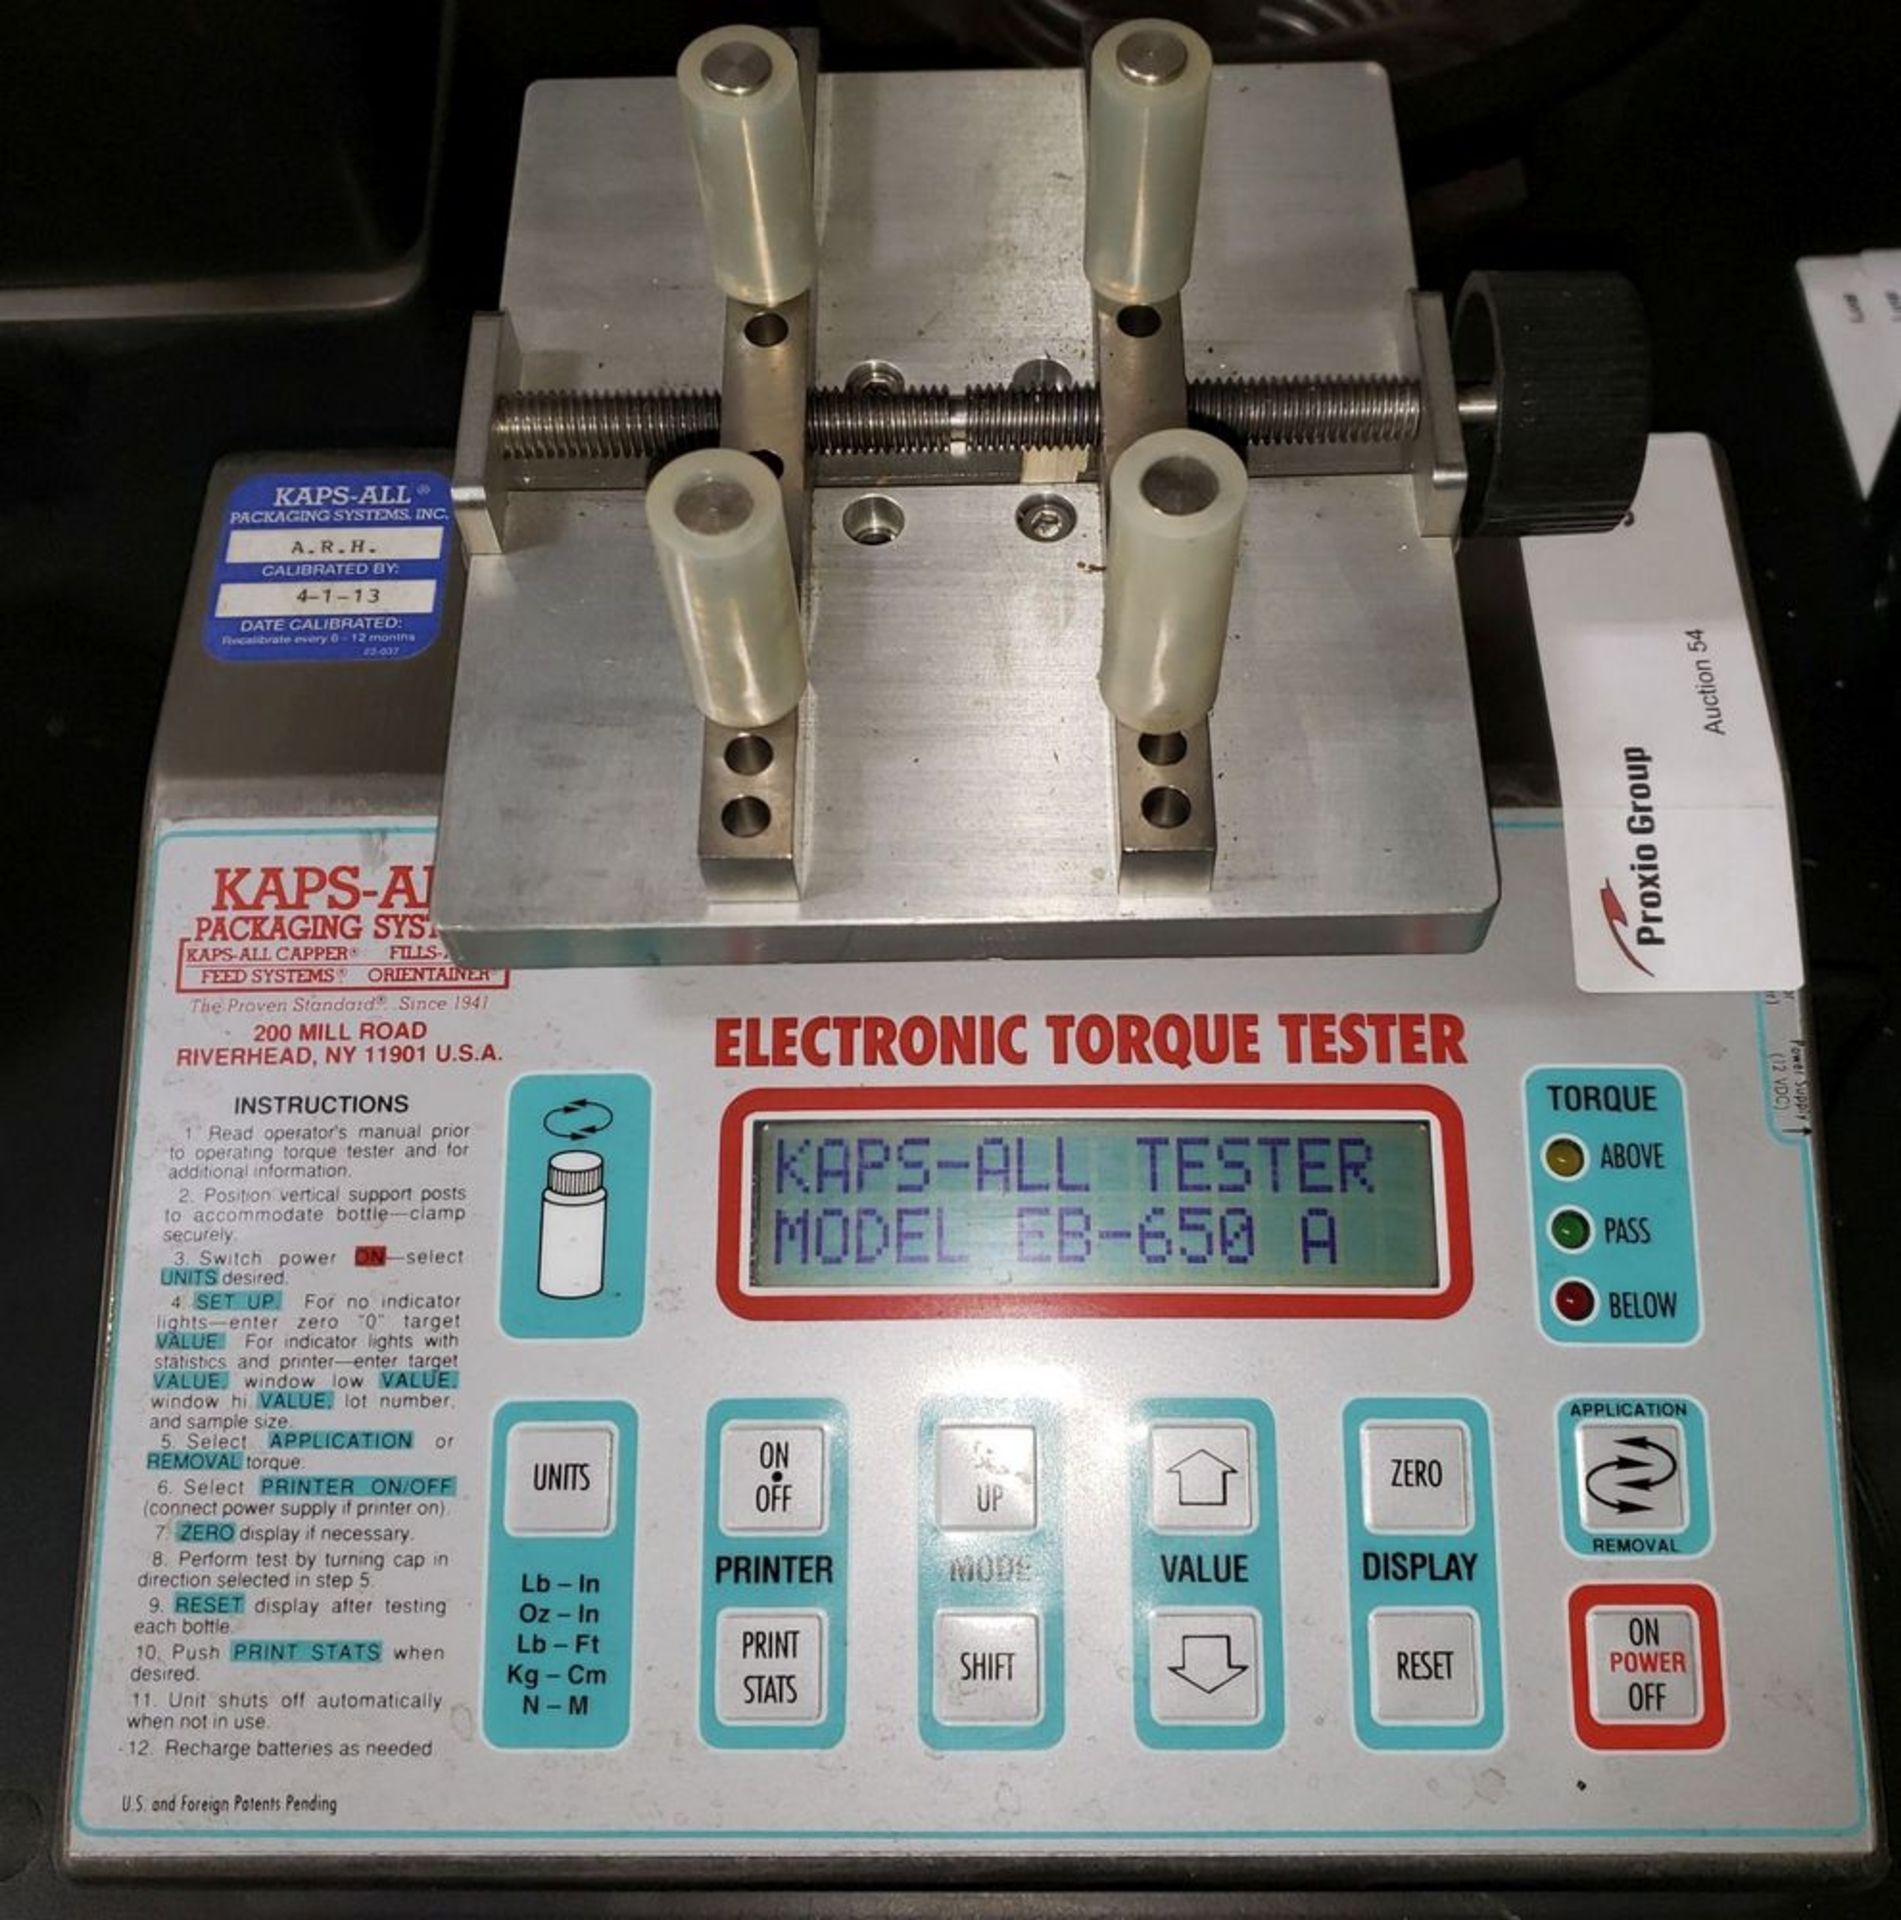 Kaps-All Electronic Torque Tester, model EB650A, with power supply